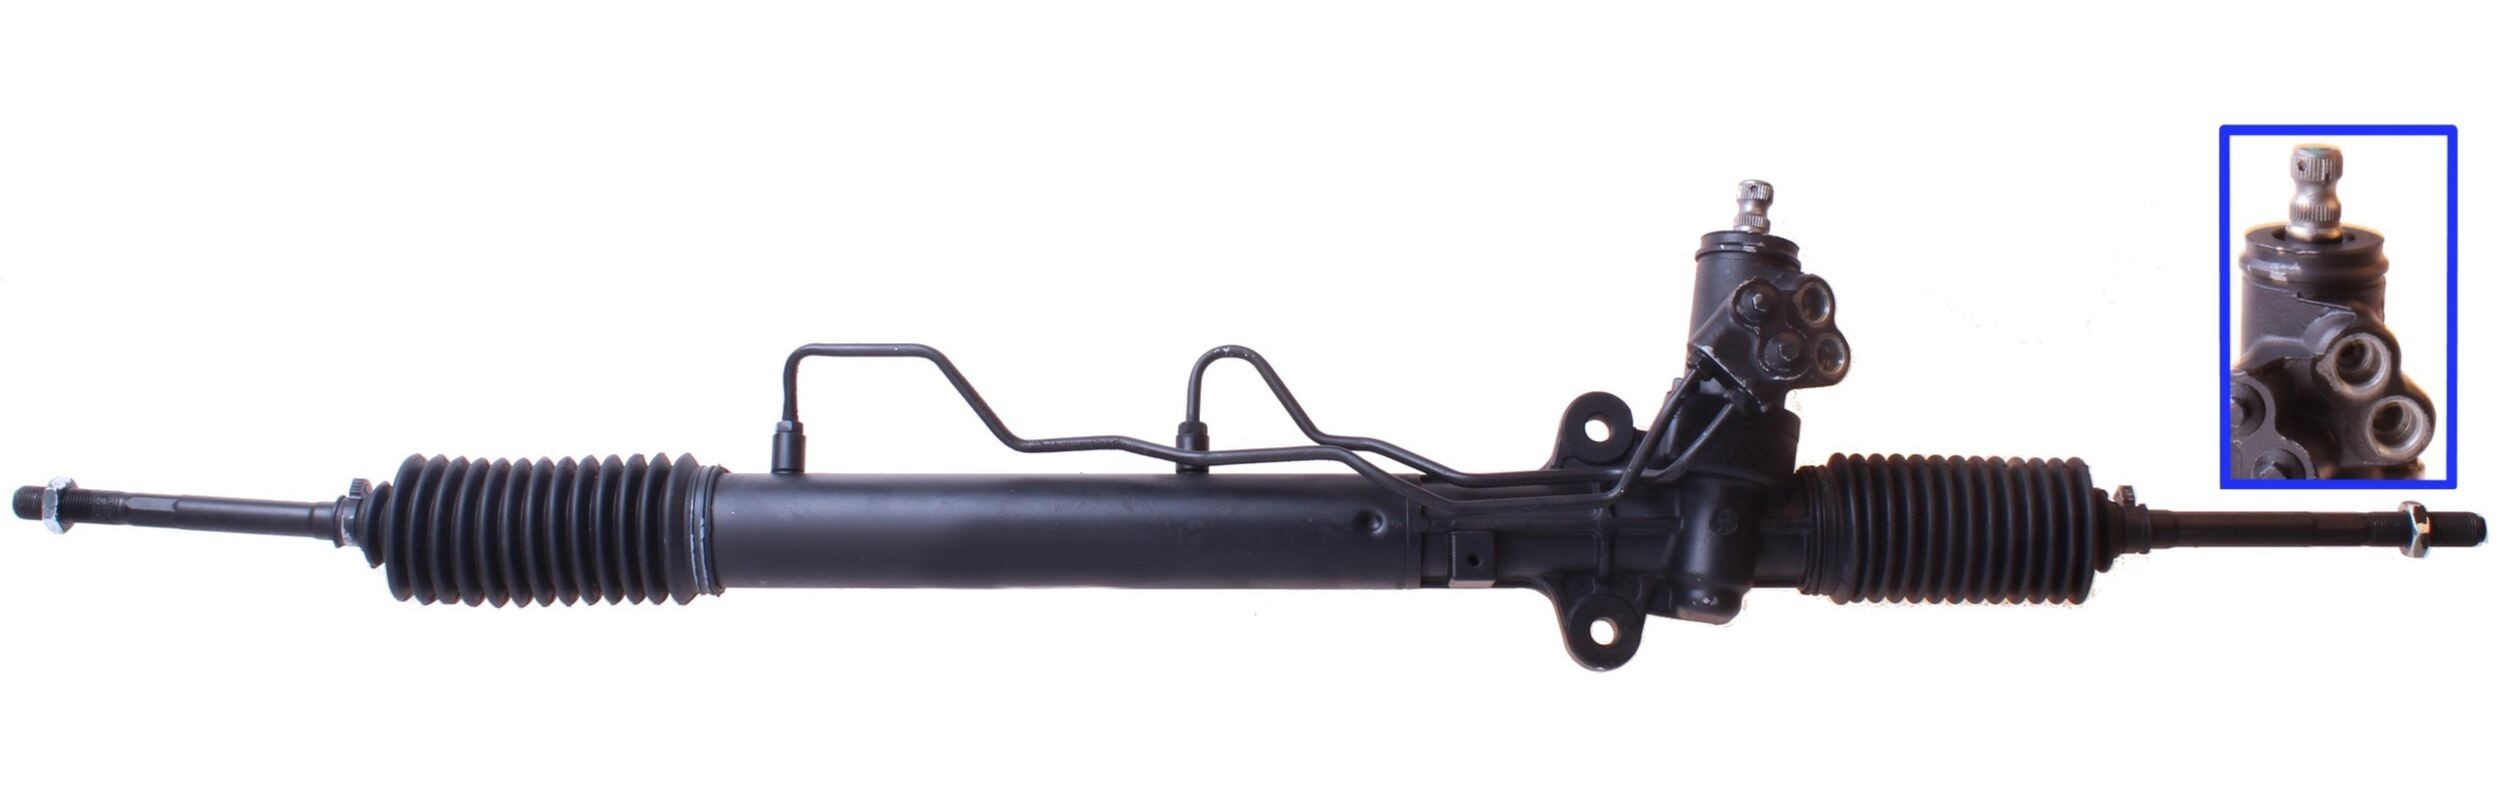 DRI 711520827 Steering rack Hydraulic, for left-hand drive vehicles, M16, 115 mm